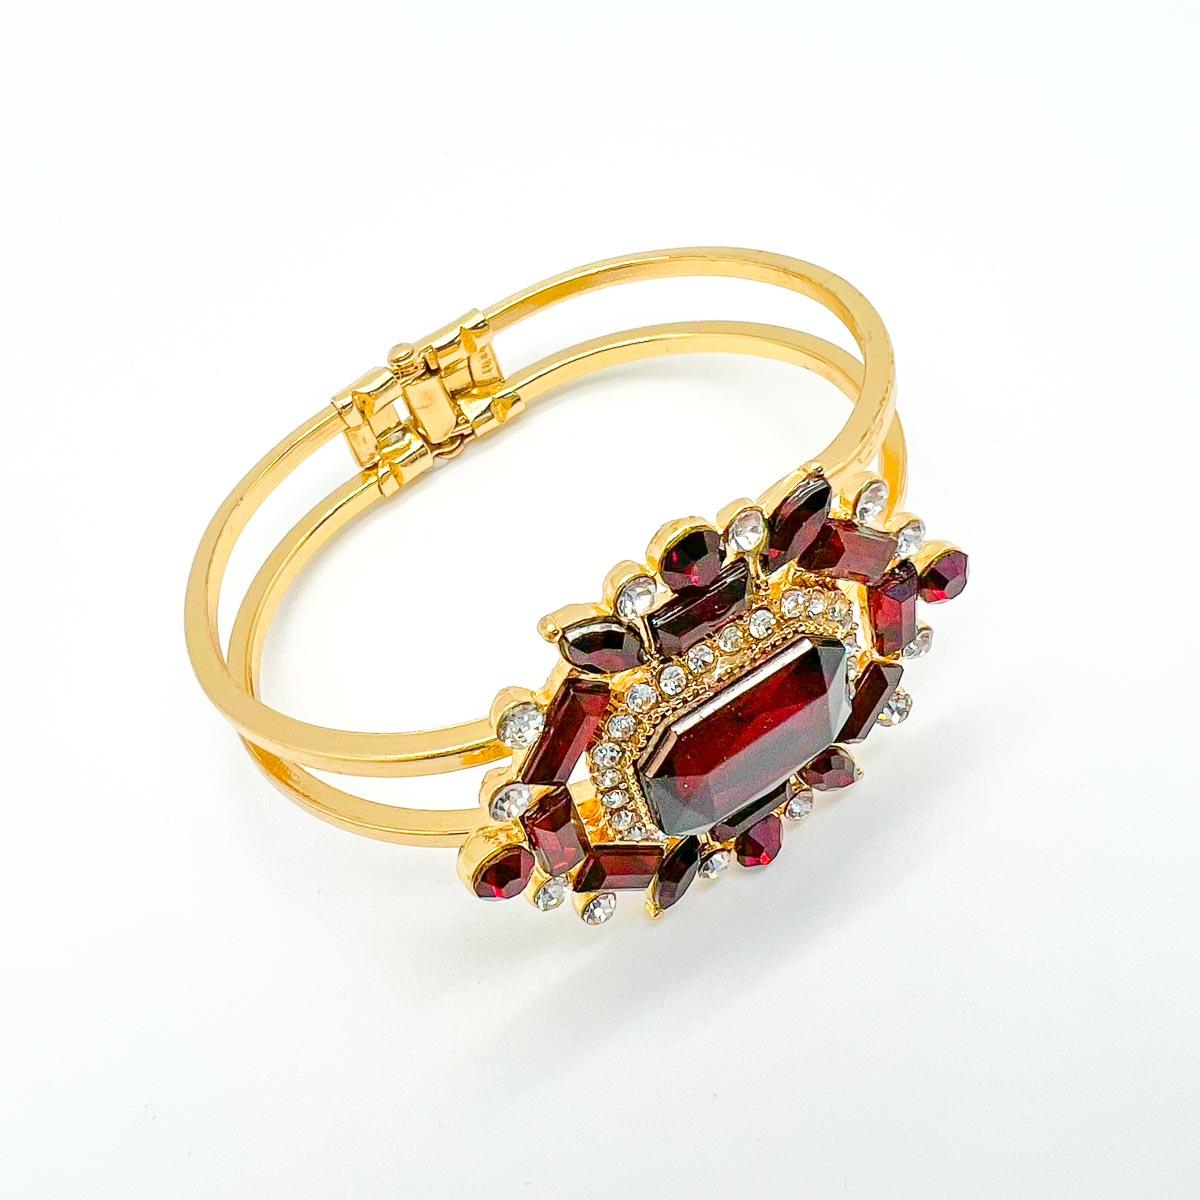 A striking Victorian Inspired Clamper Bangle. Garnet coloured stones in various fancy cuts steal the show. Adorn your wrist with this glamorous finishing touch.

Vintage Condition: Very good without damage or noteworthy wear.
Materials: Gold plated